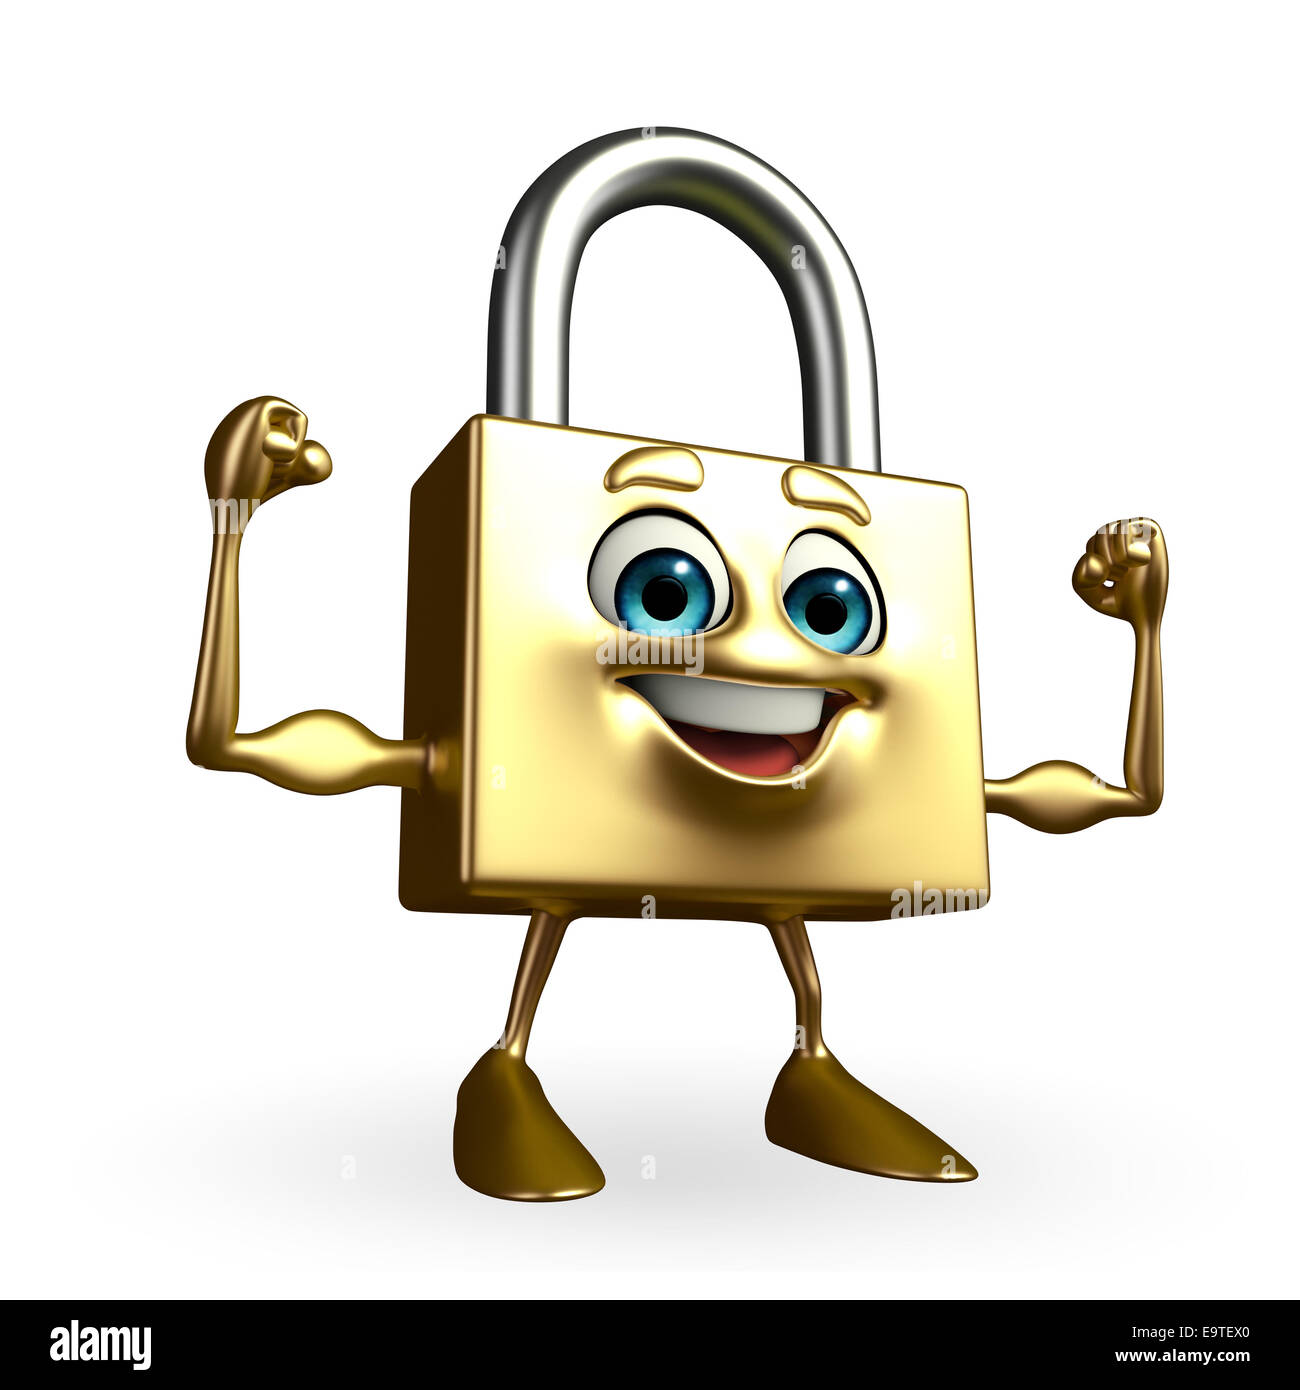 Cartoon Character of lock with bodybuilding pose Stock Photo - Alamy